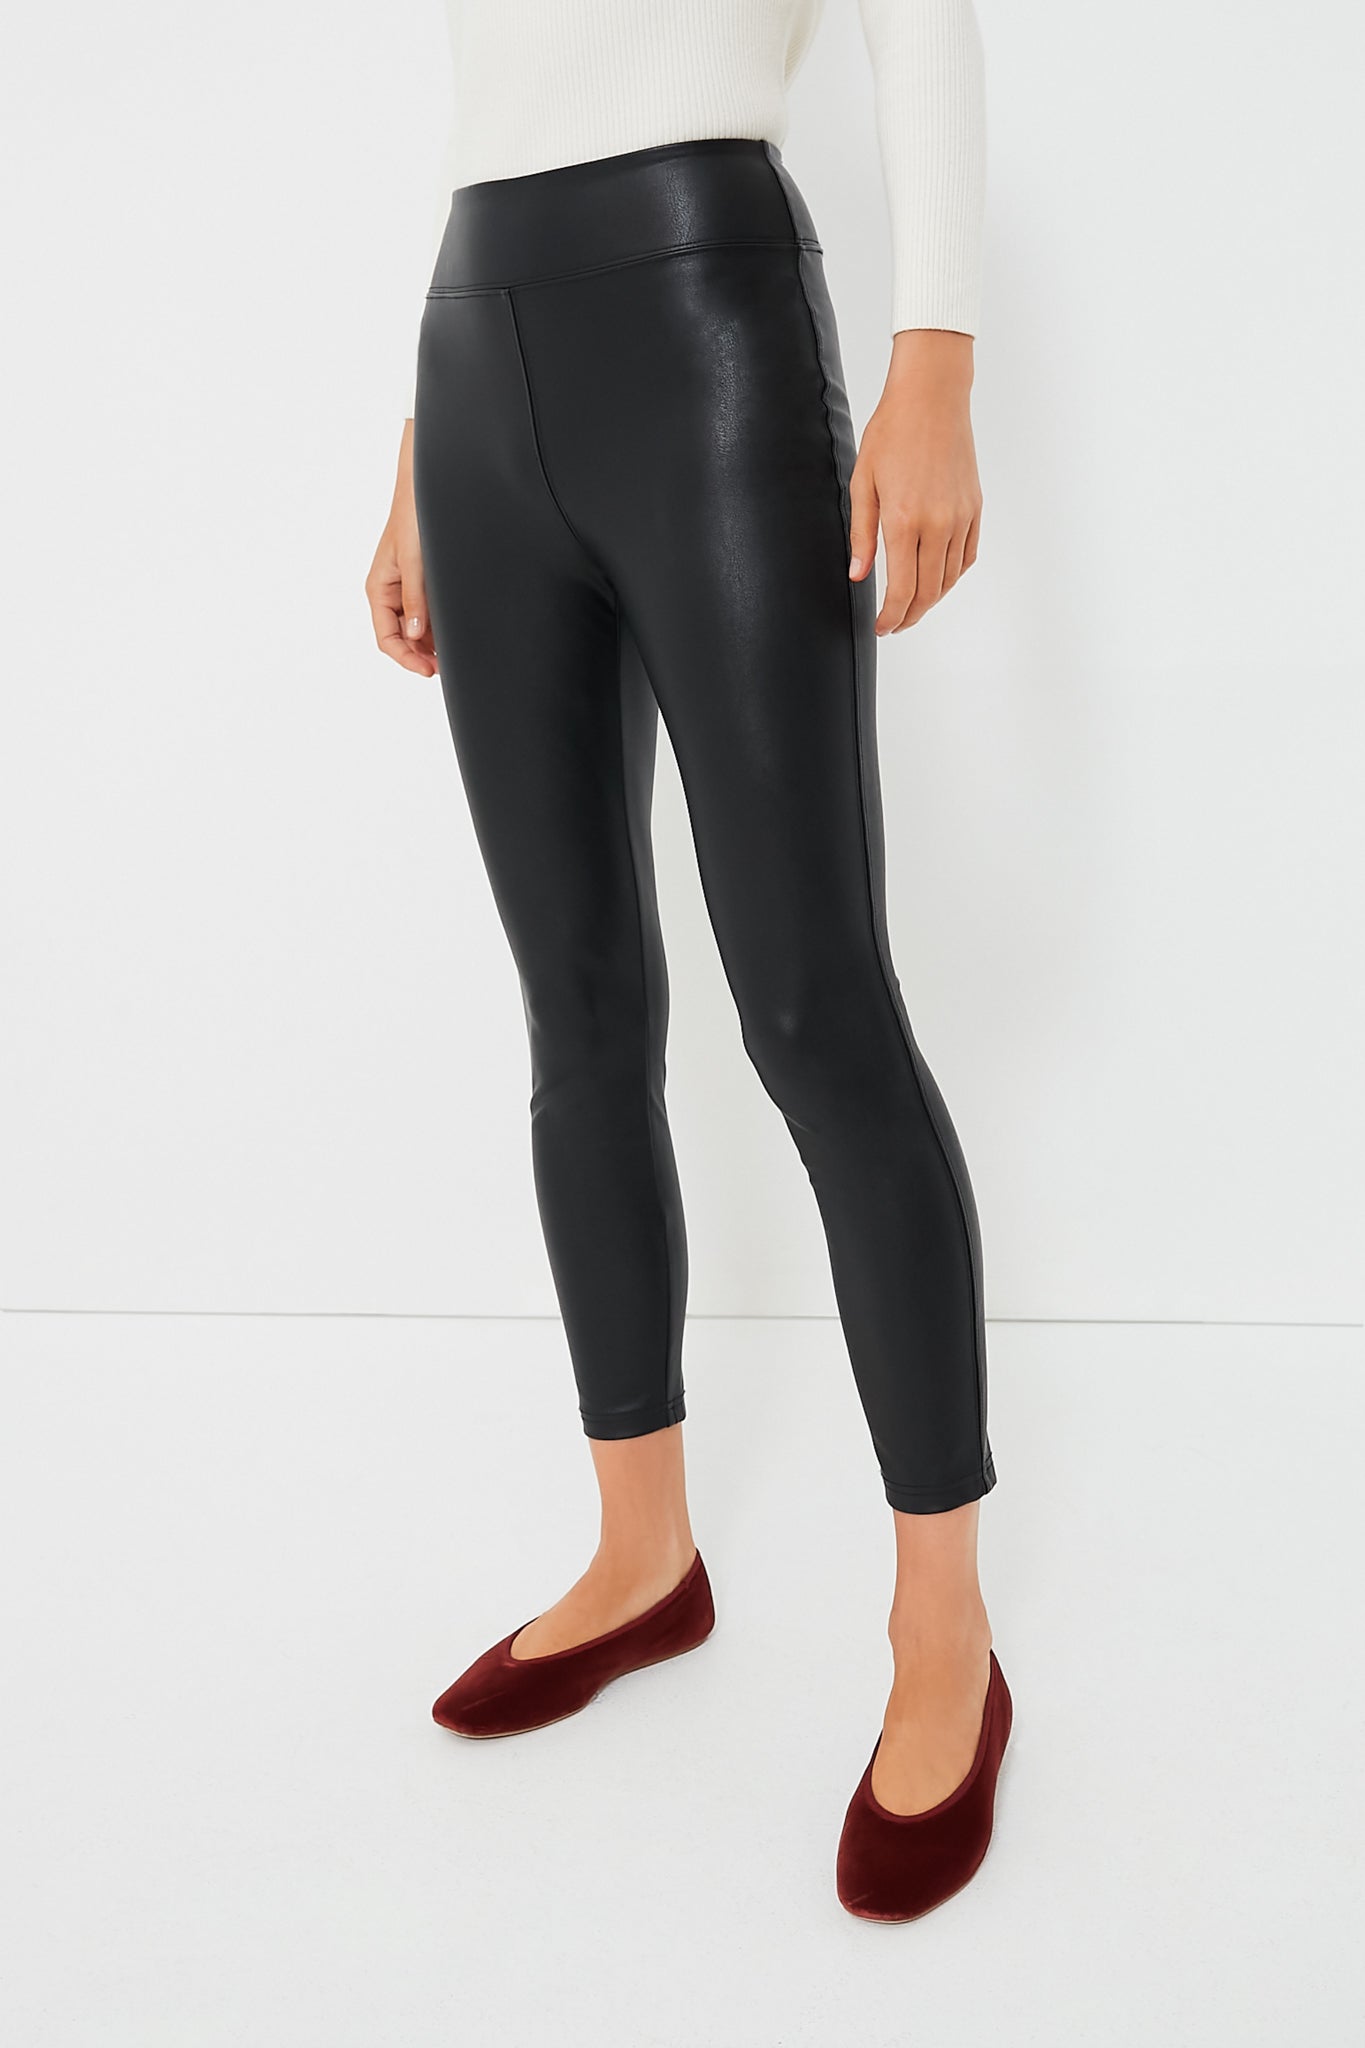 Riley BROWN High Waist Faux Leather Leggings – Get That Trend